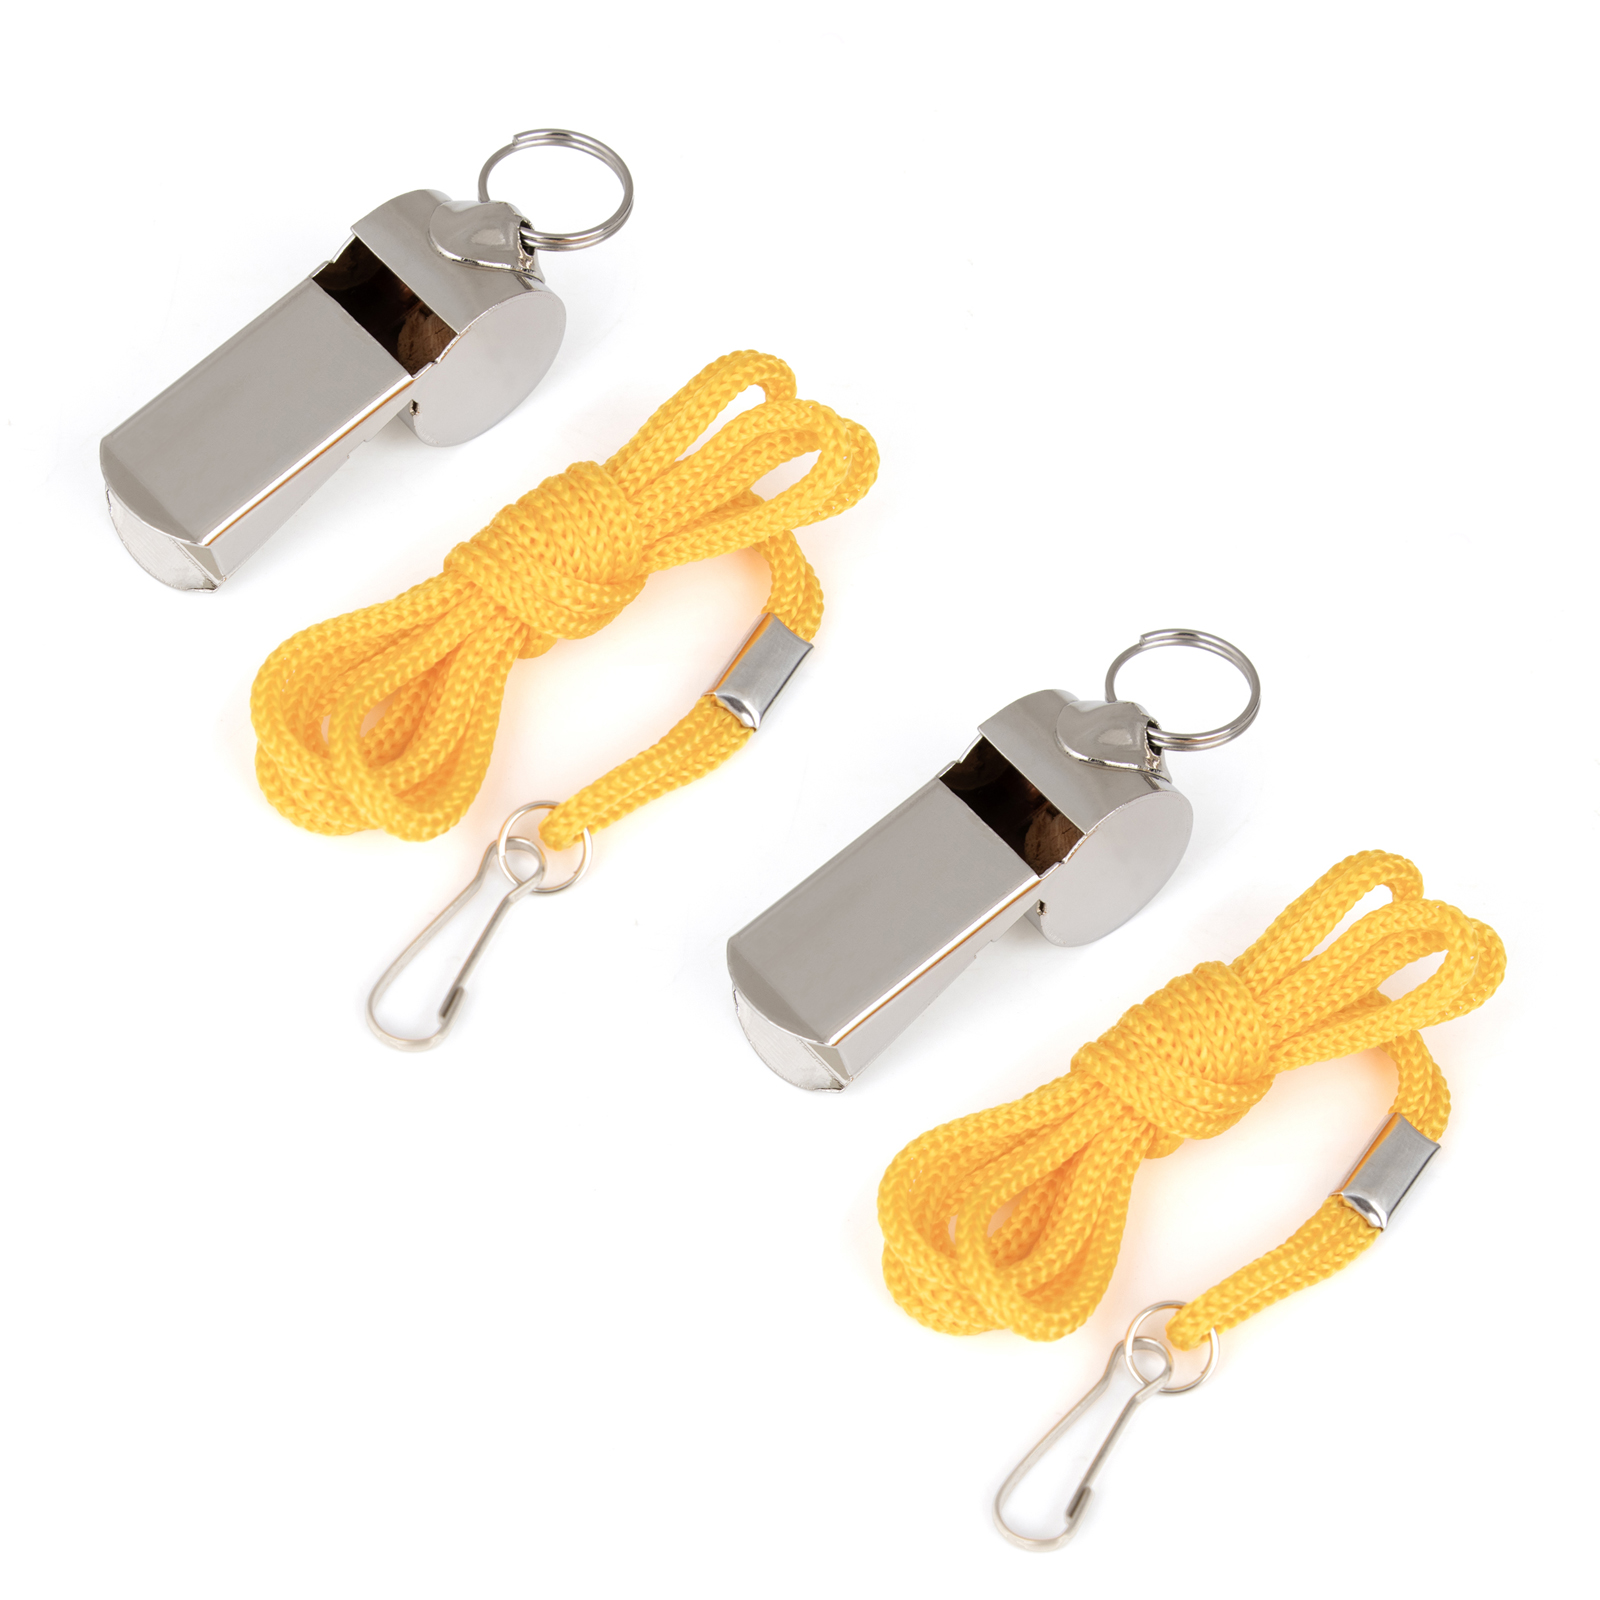 2pcs Plastic Whistle With Finger Grip Survival Whistle Skate/Football/Sports 